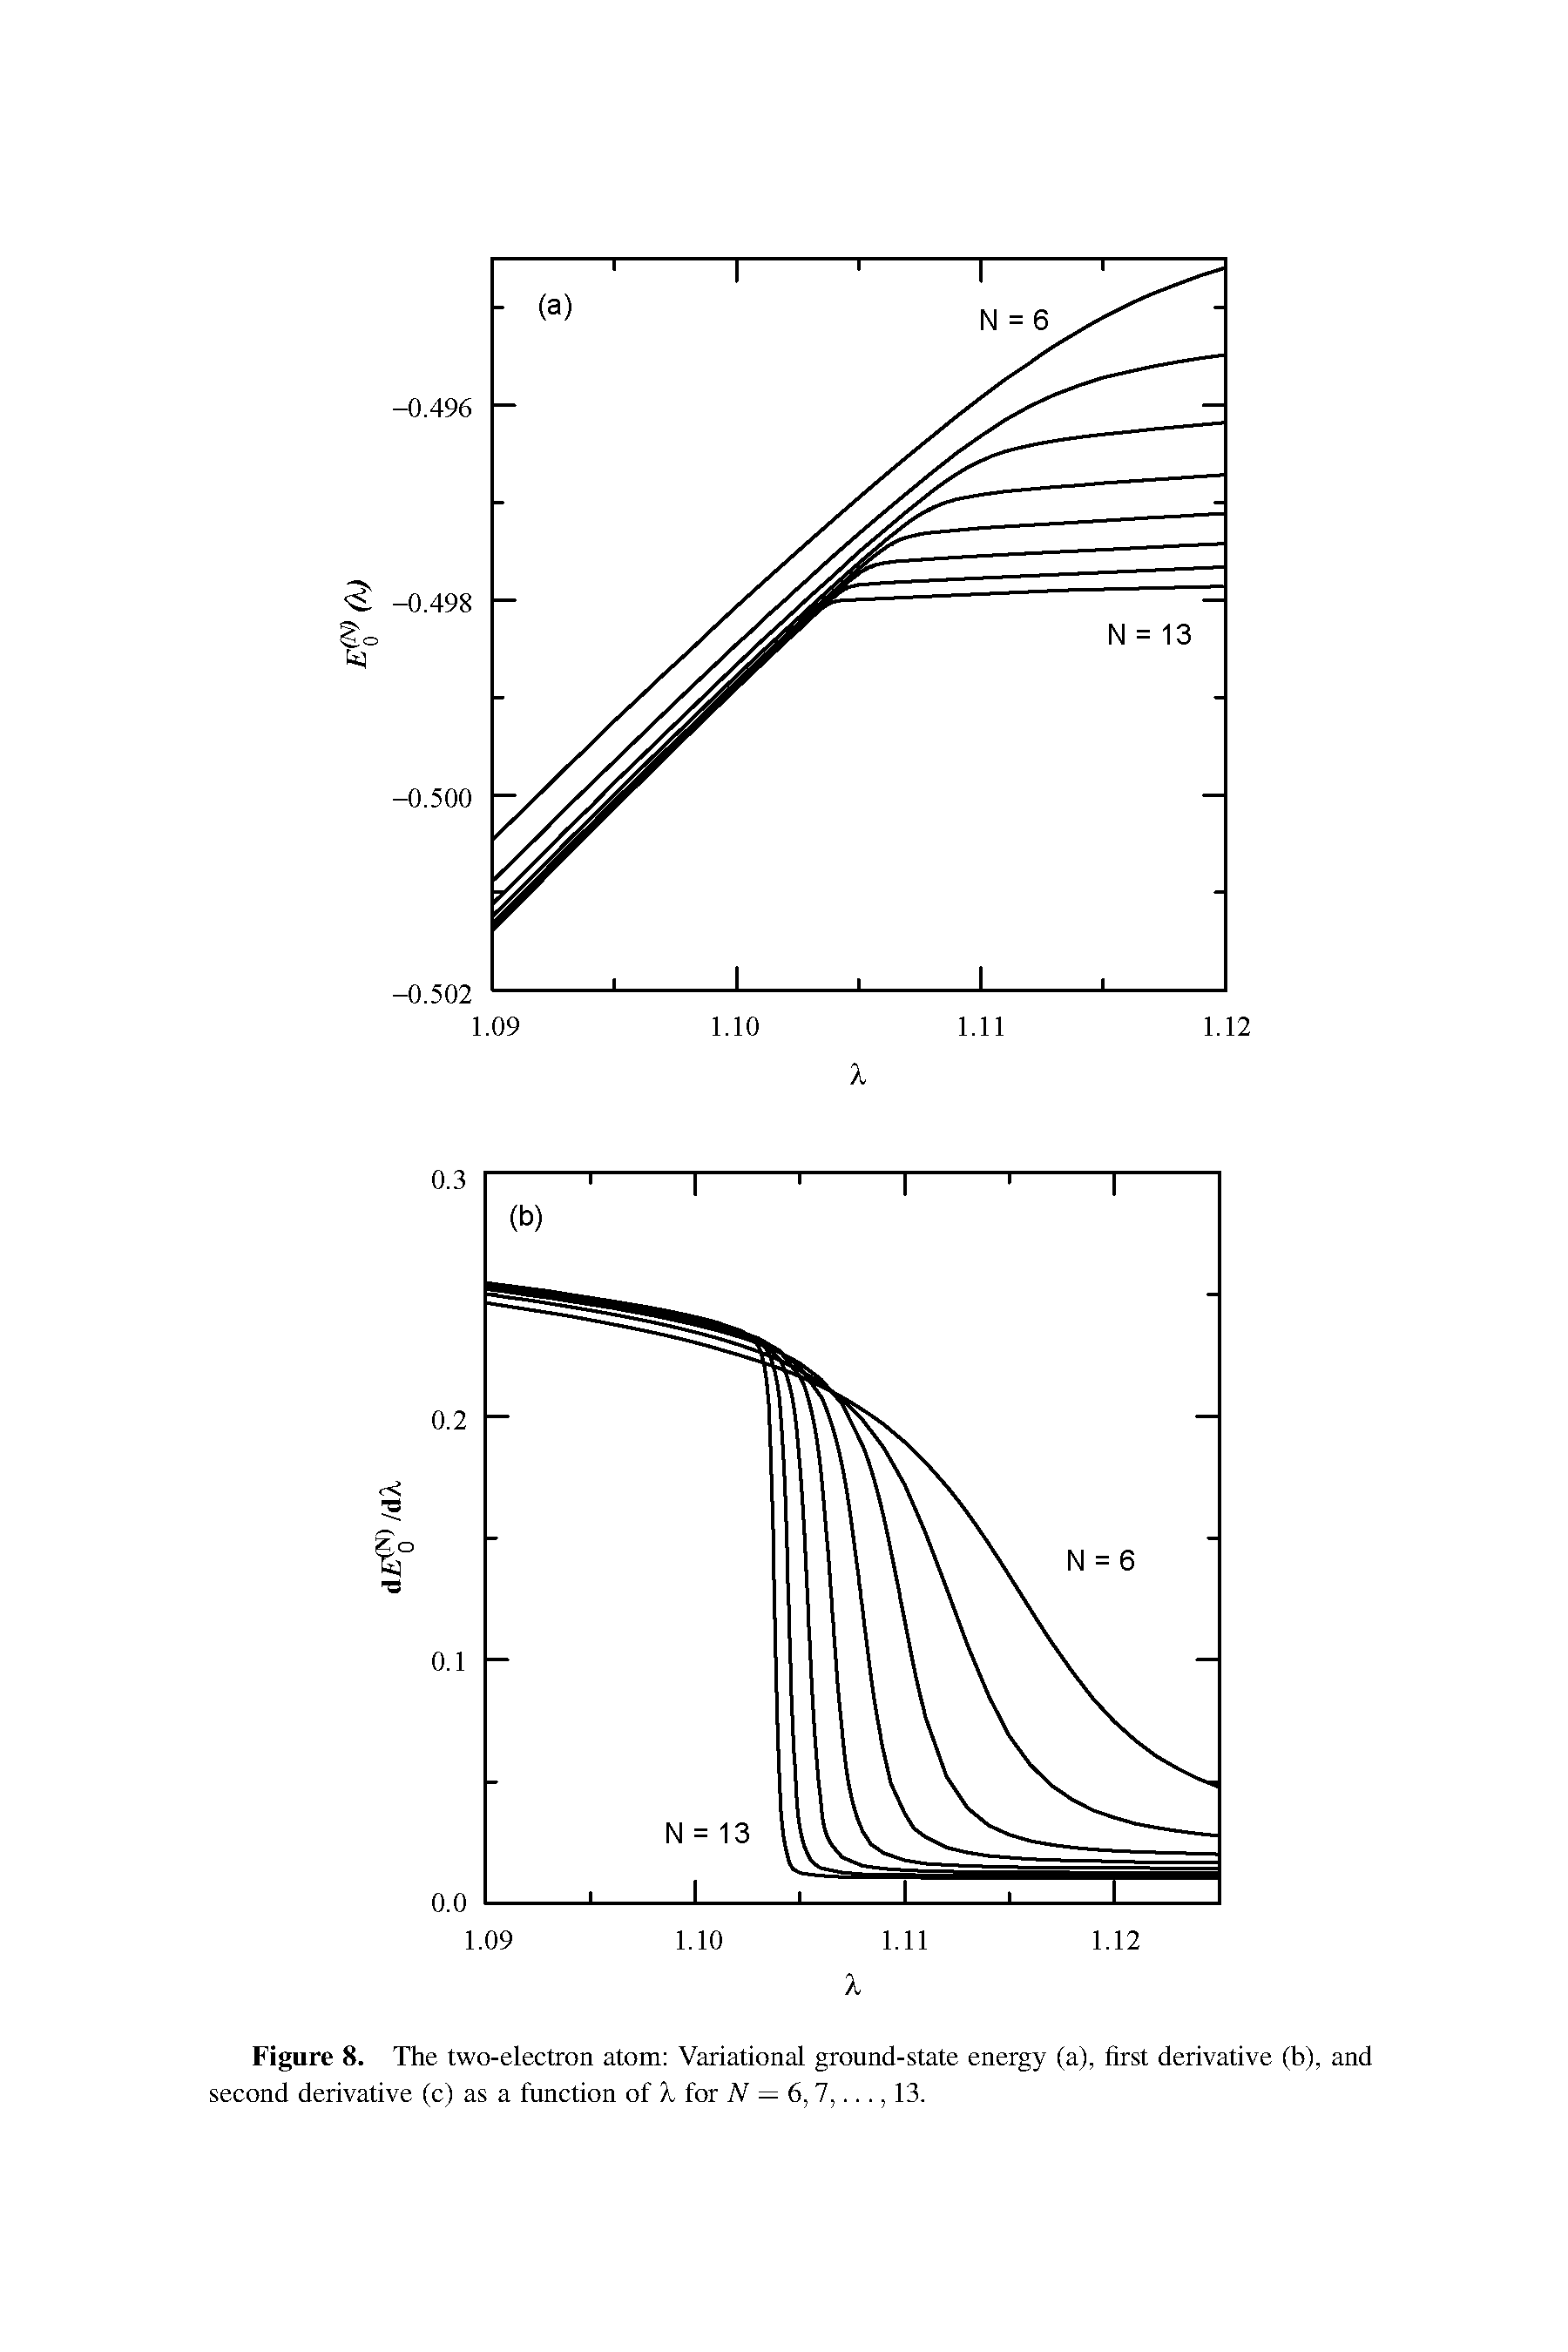 Figure 8. The two-electron atom Variational ground-state energy (a), first derivative (b), and second derivative (c) as a function of X for N — 6,7,..., 13.